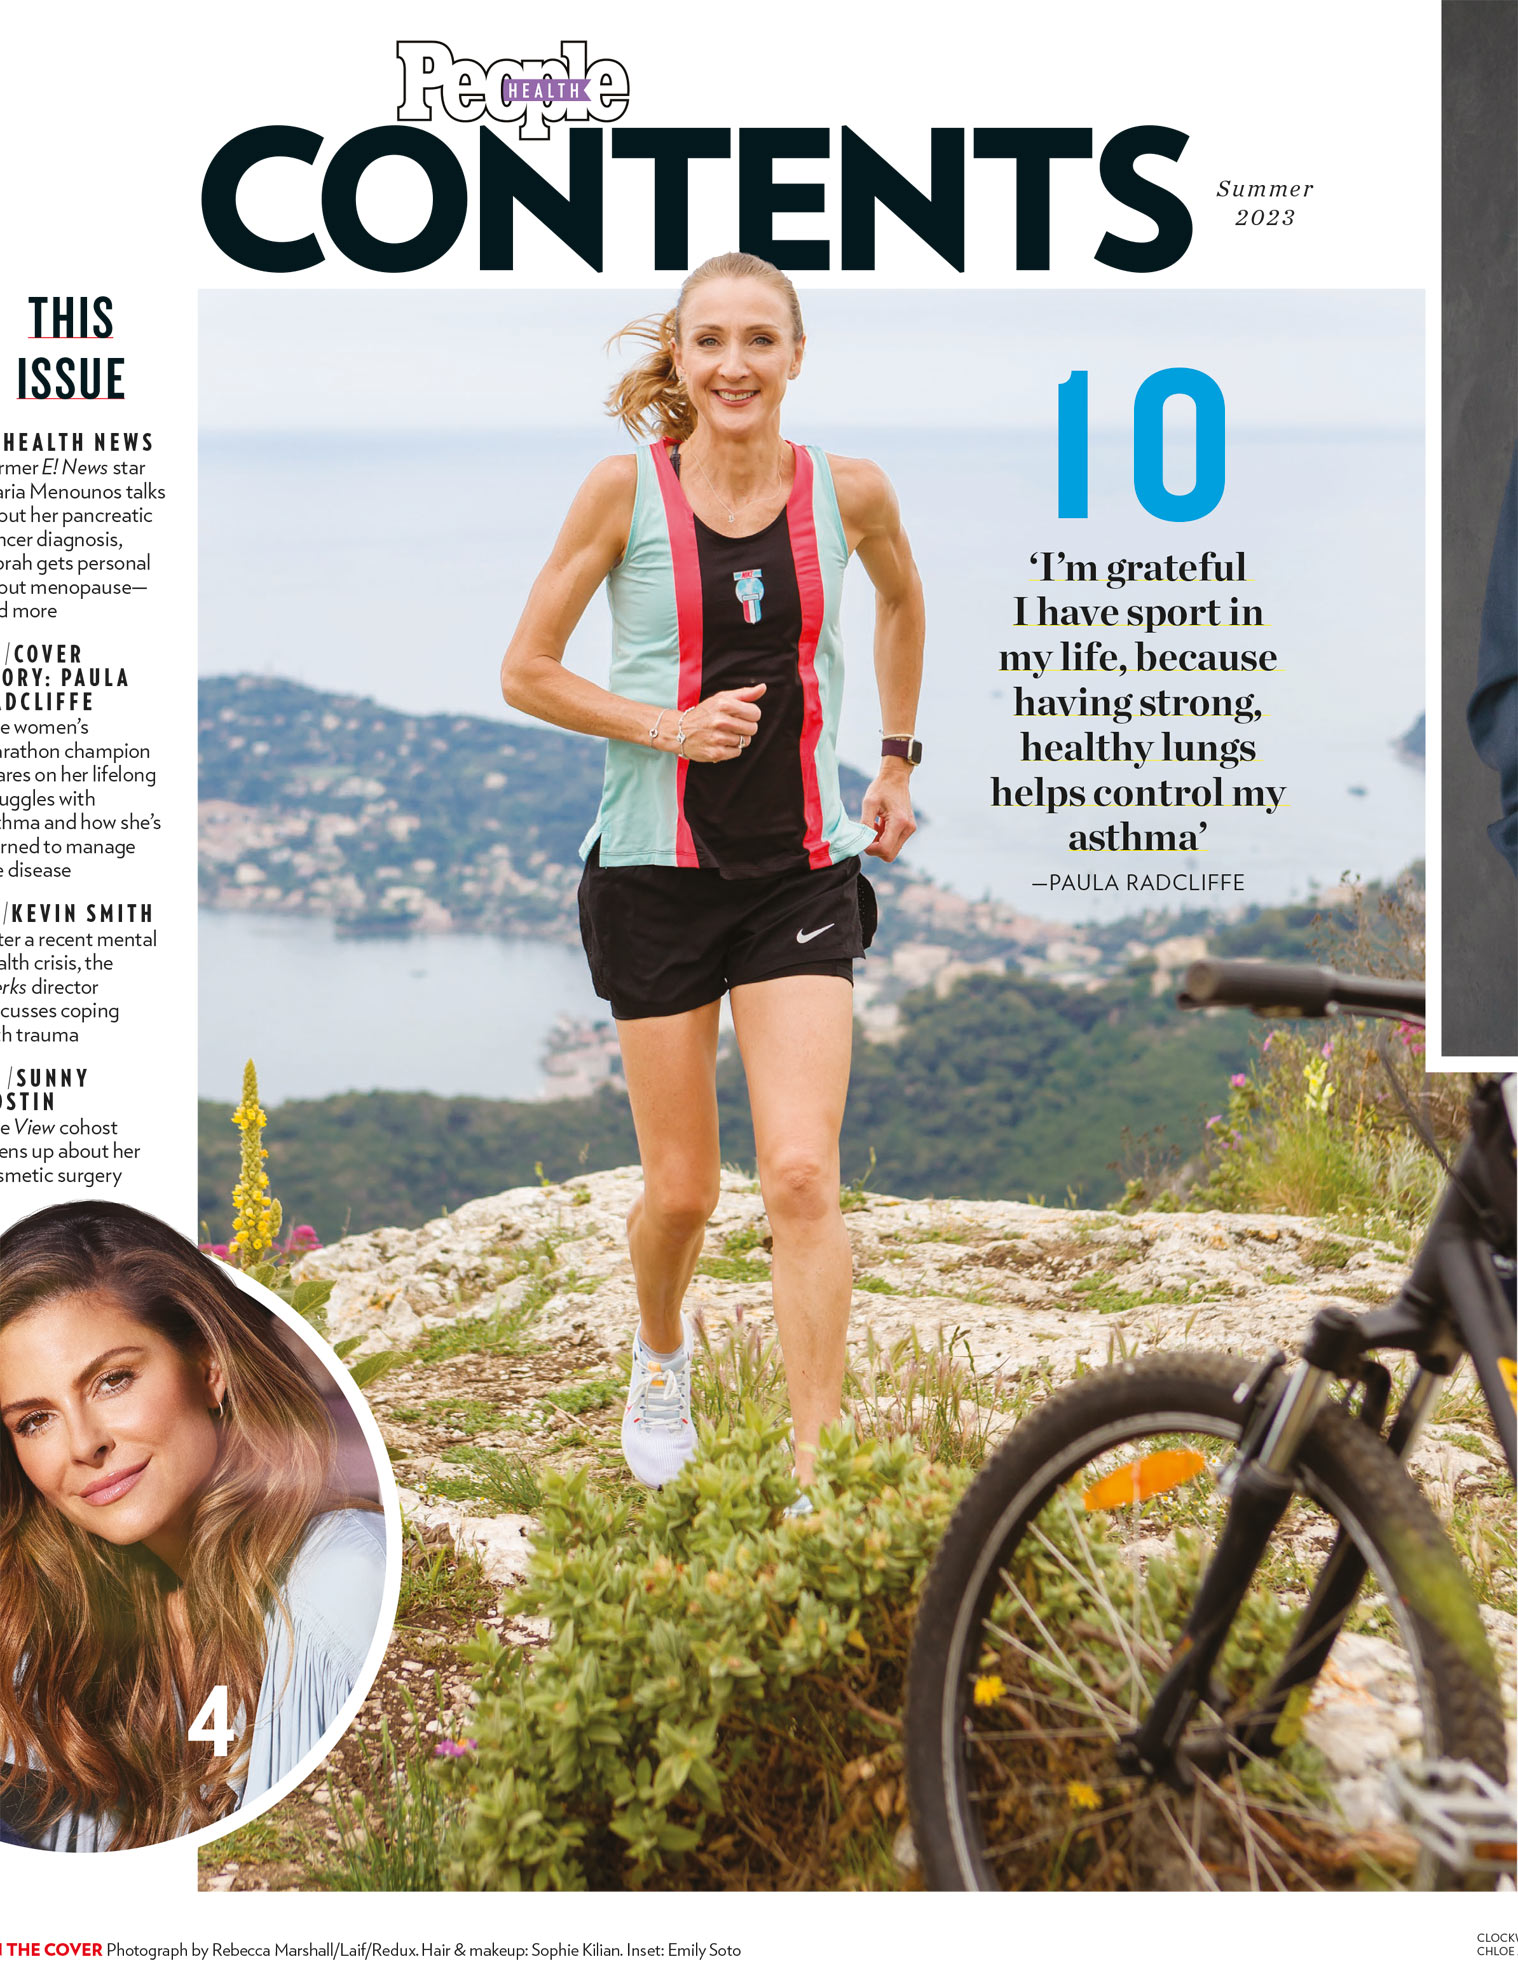 Contents page of People Health magazine, showing a photograph of Paula Radcliffe in sportswear running on a hill, with a sea view in the background